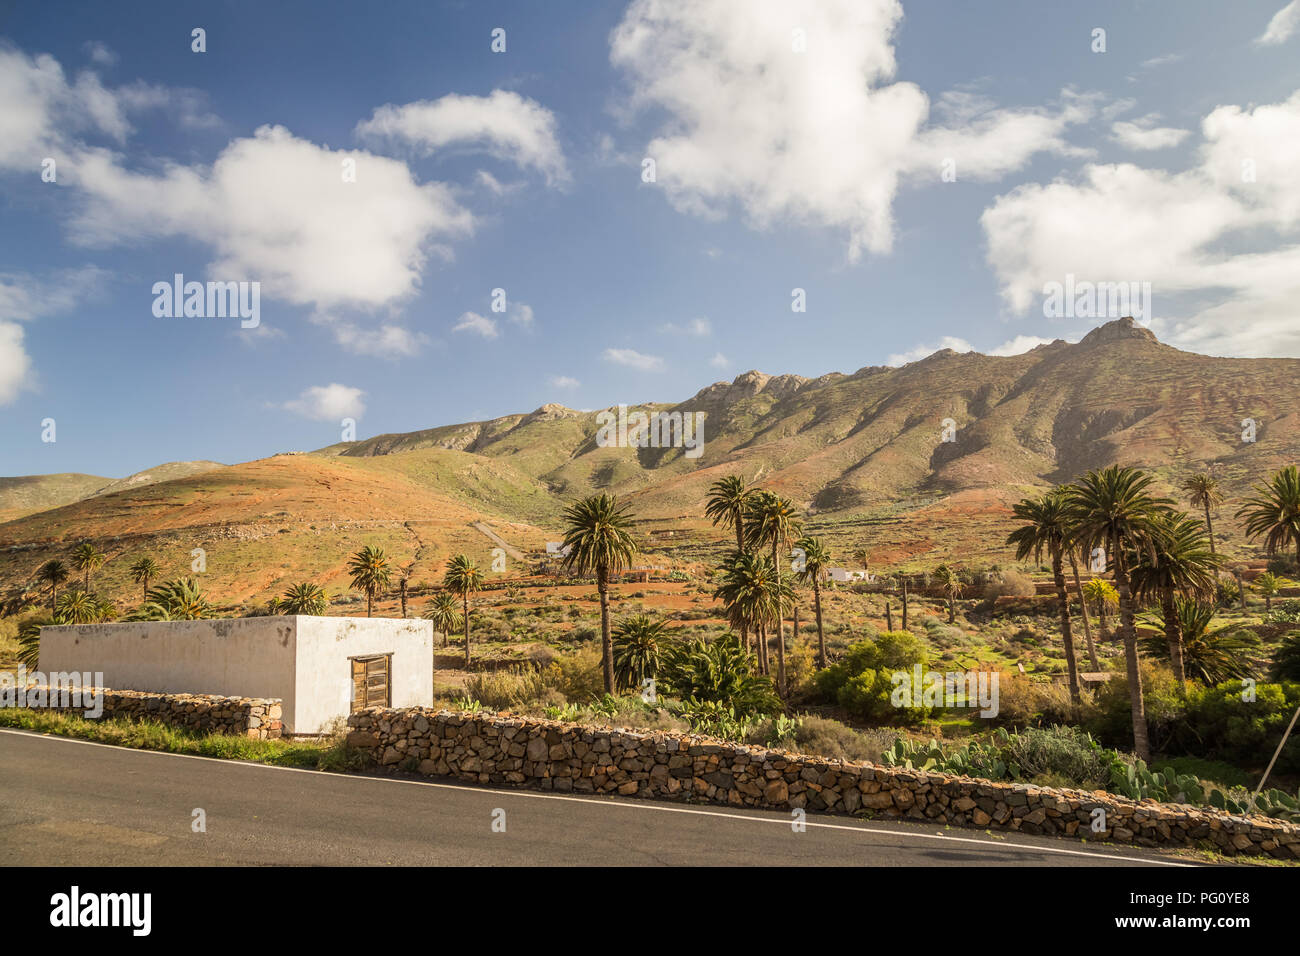 Rural house ad dry landscape hills behind in Fuerteventura, Canary Islands, Spain. Stock Photo